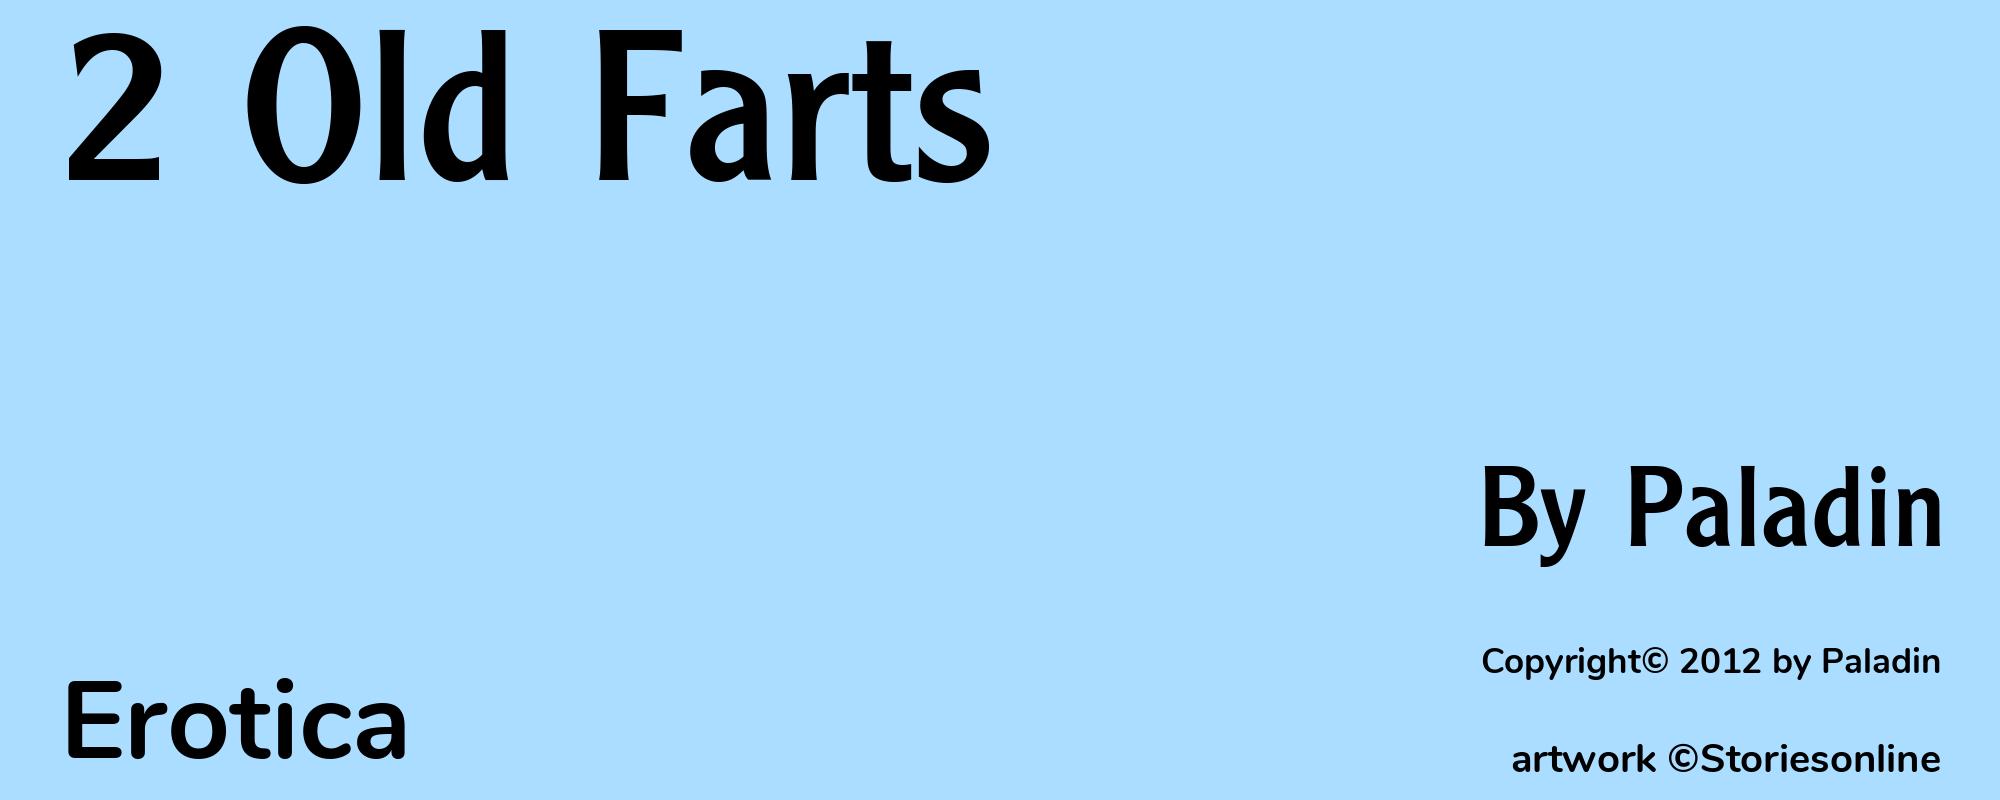 2 Old Farts - Cover